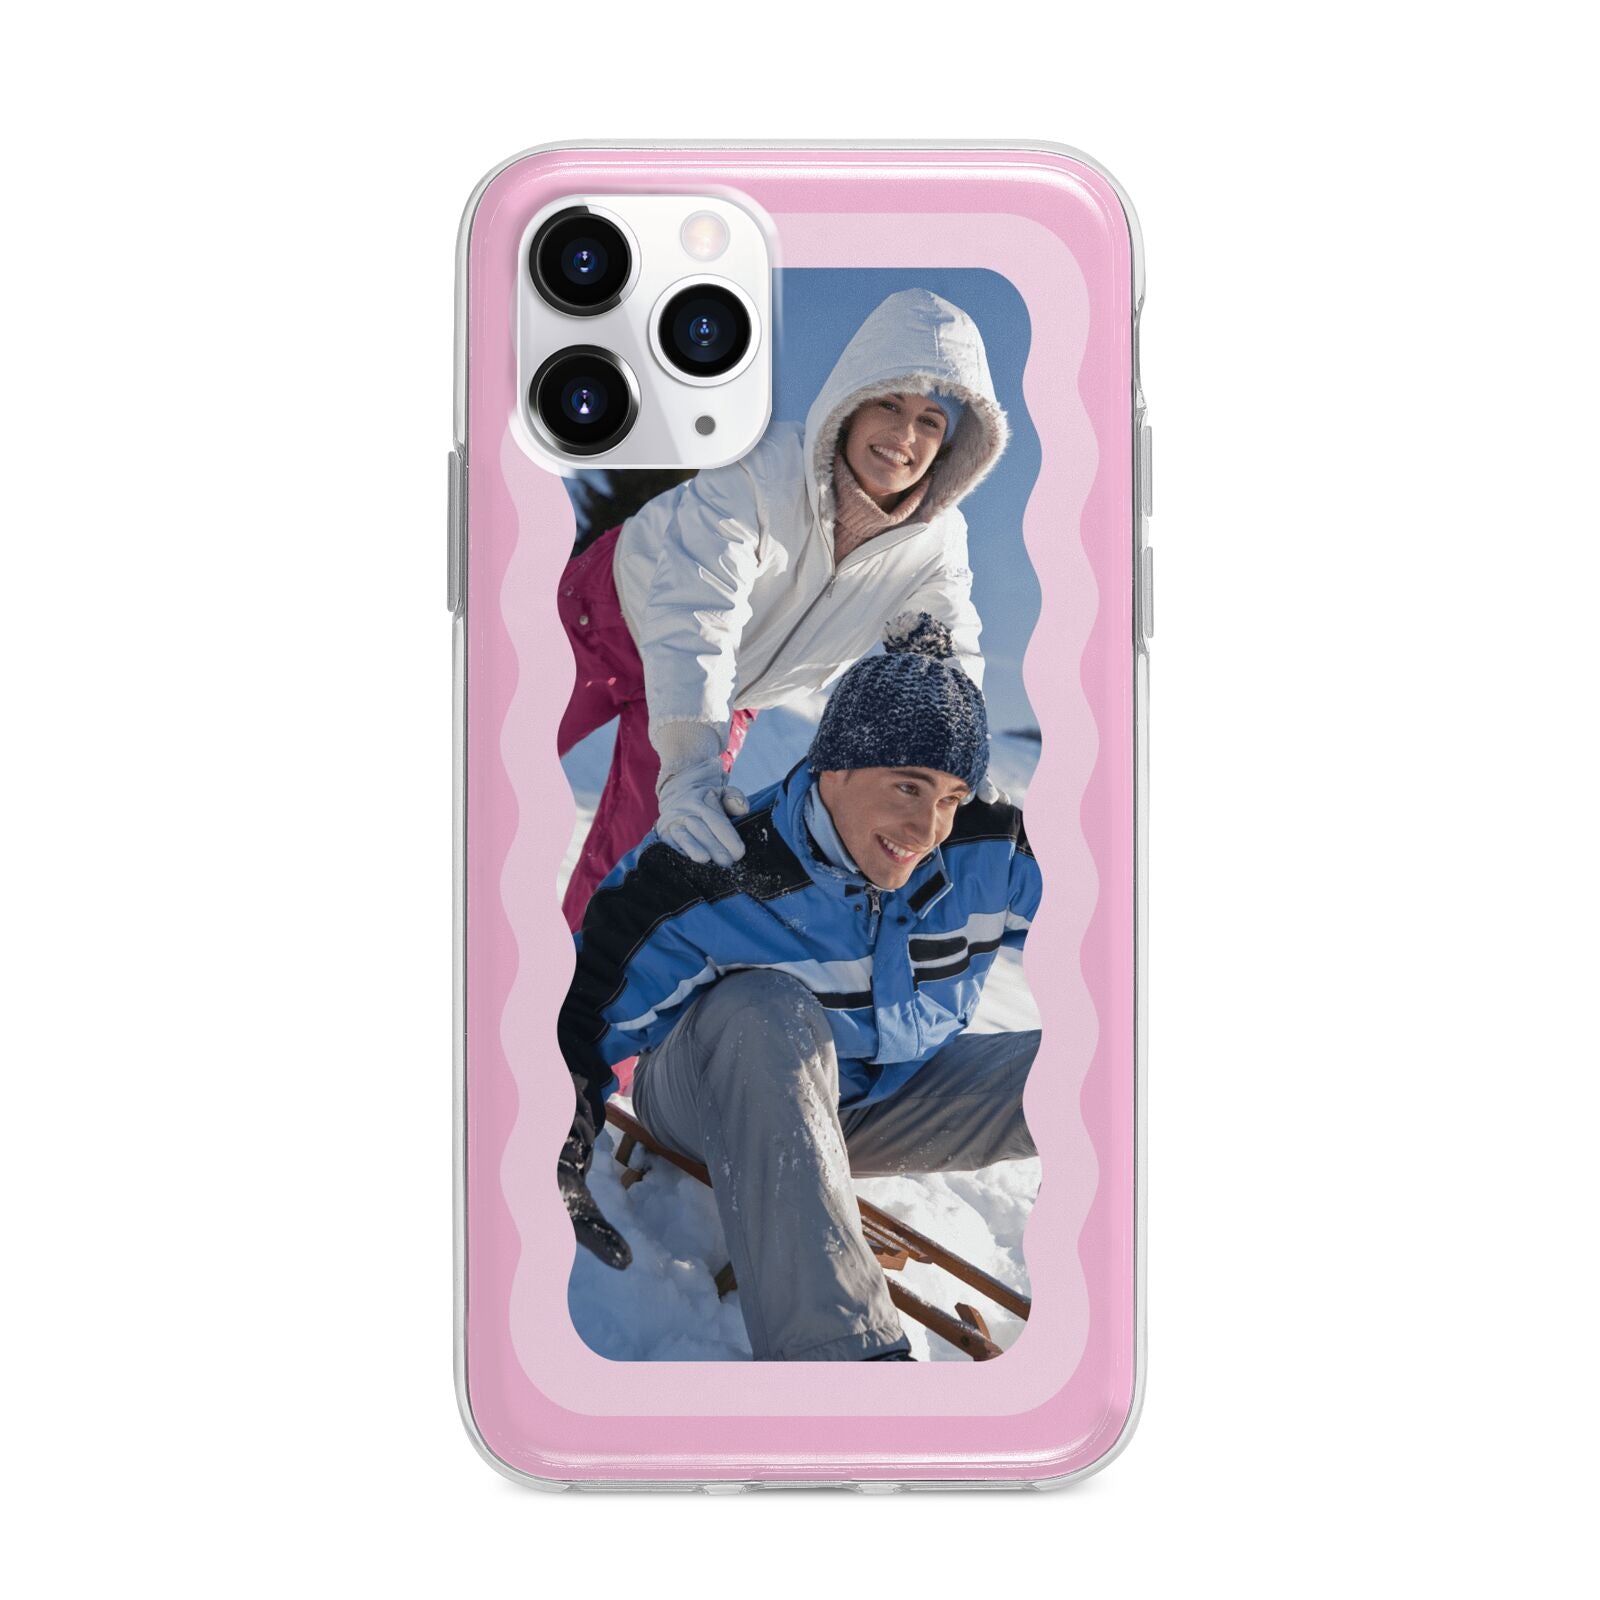 Wavy Photo Border Apple iPhone 11 Pro Max in Silver with Bumper Case